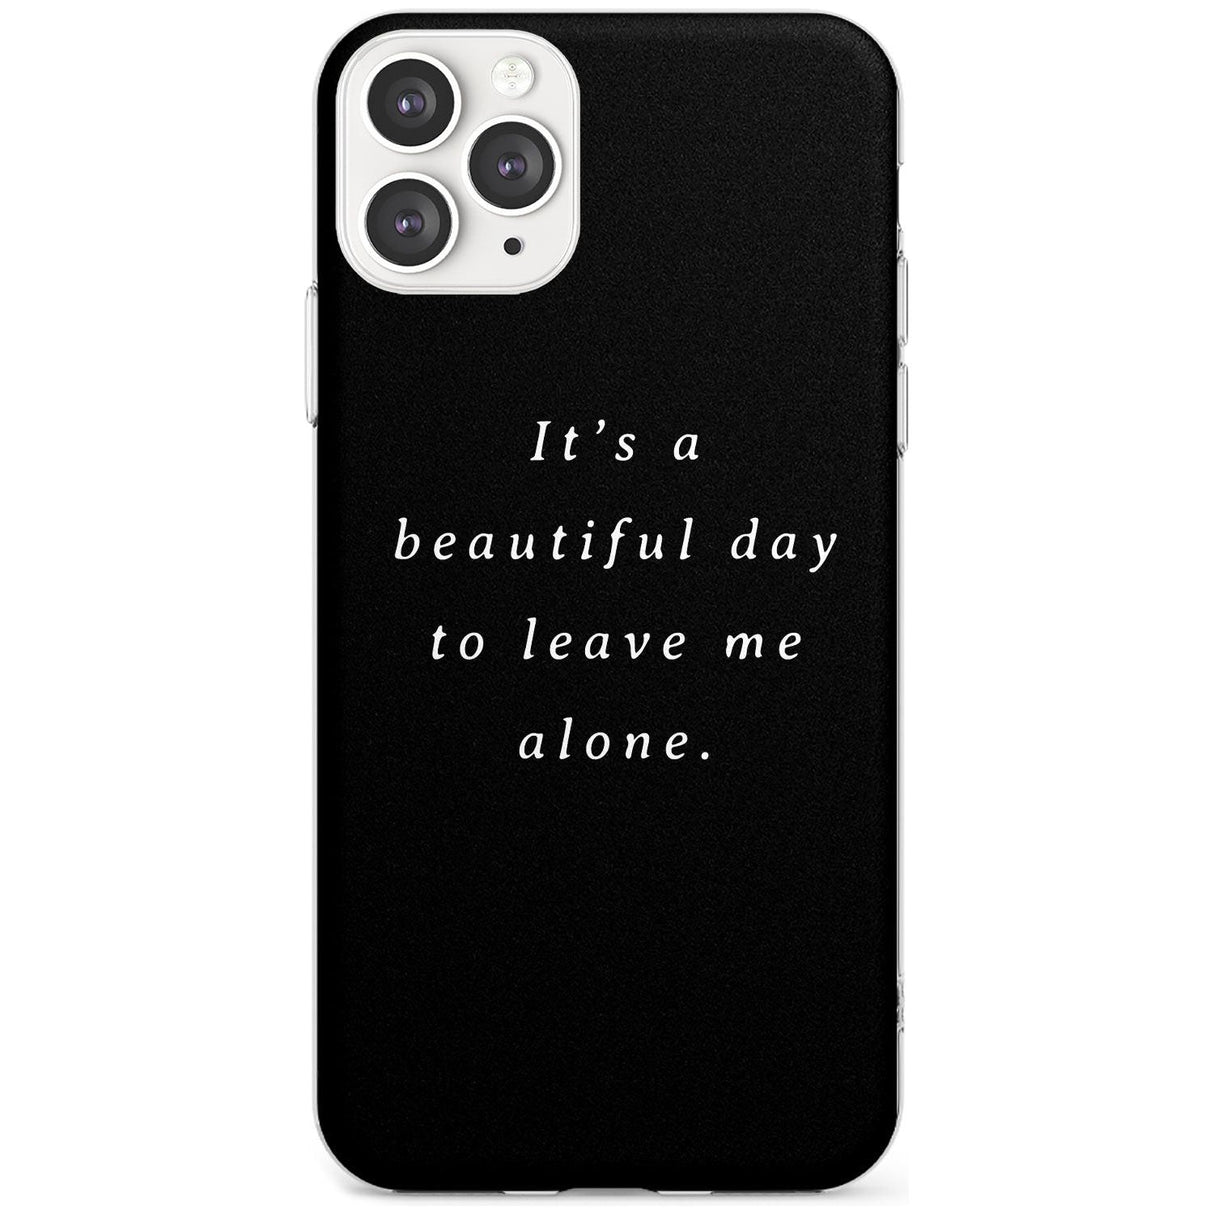 Leave me alone Slim TPU Phone Case for iPhone 11 Pro Max